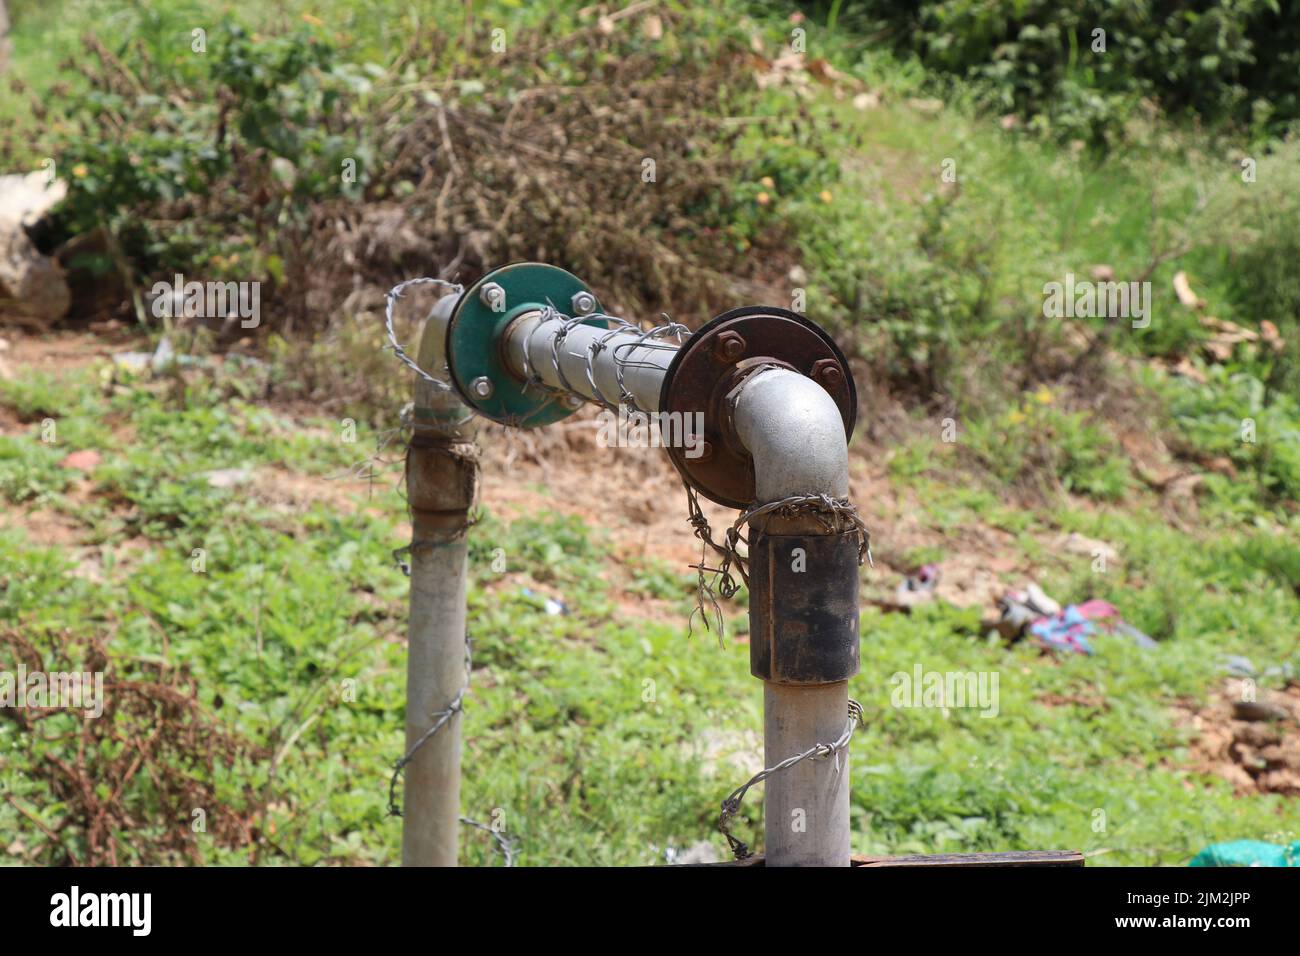 Old submersible or underground water pump connected with metal pipes to transport water to places Stock Photo